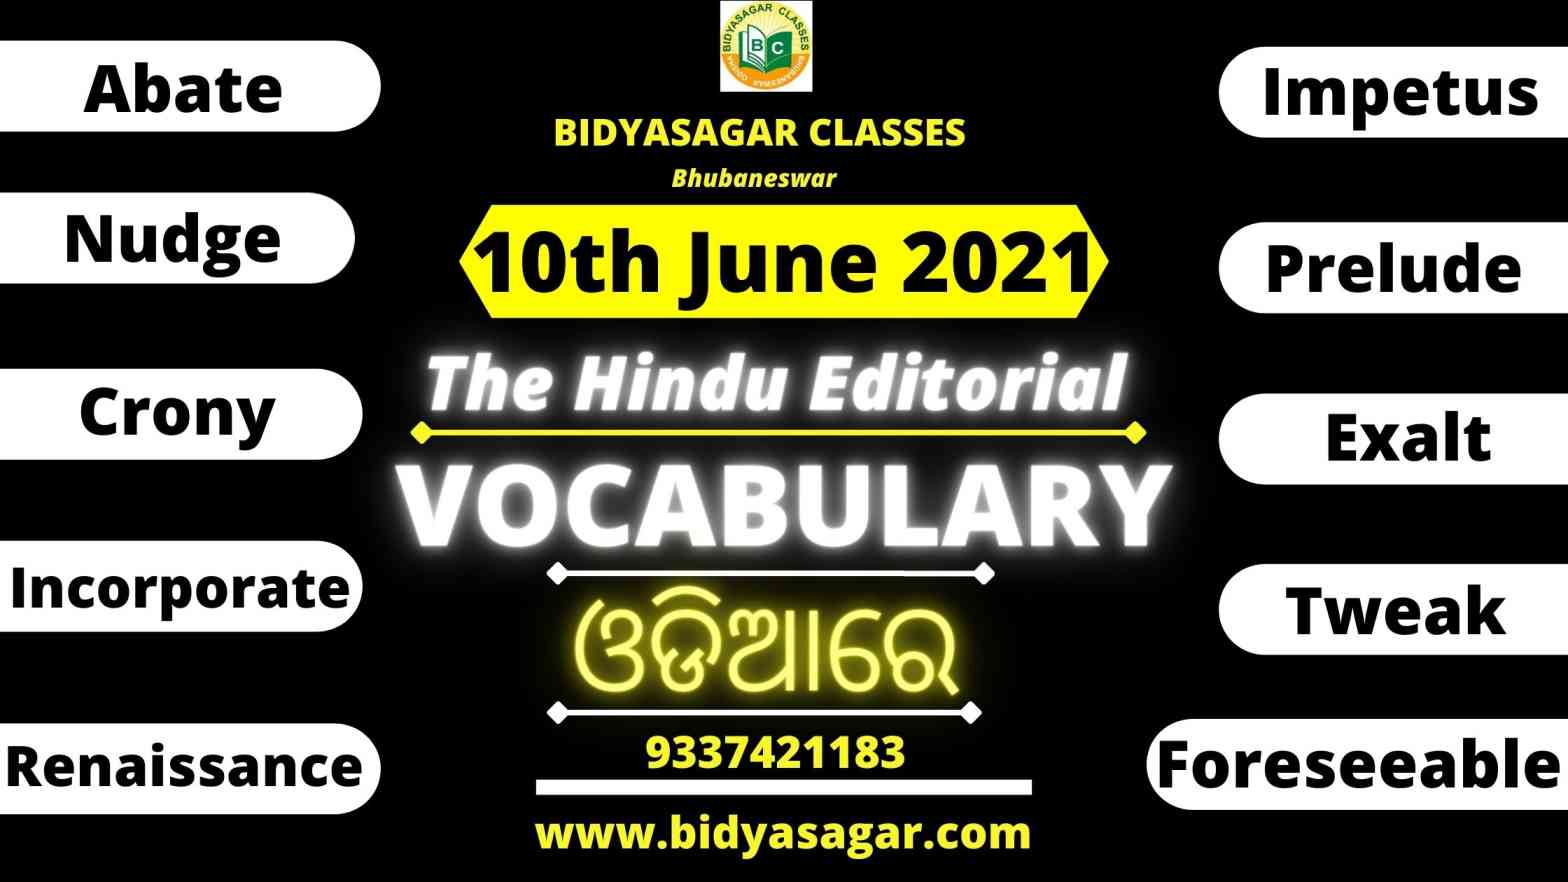 The Hindu Editorial Vocabulary of 10th June 2021